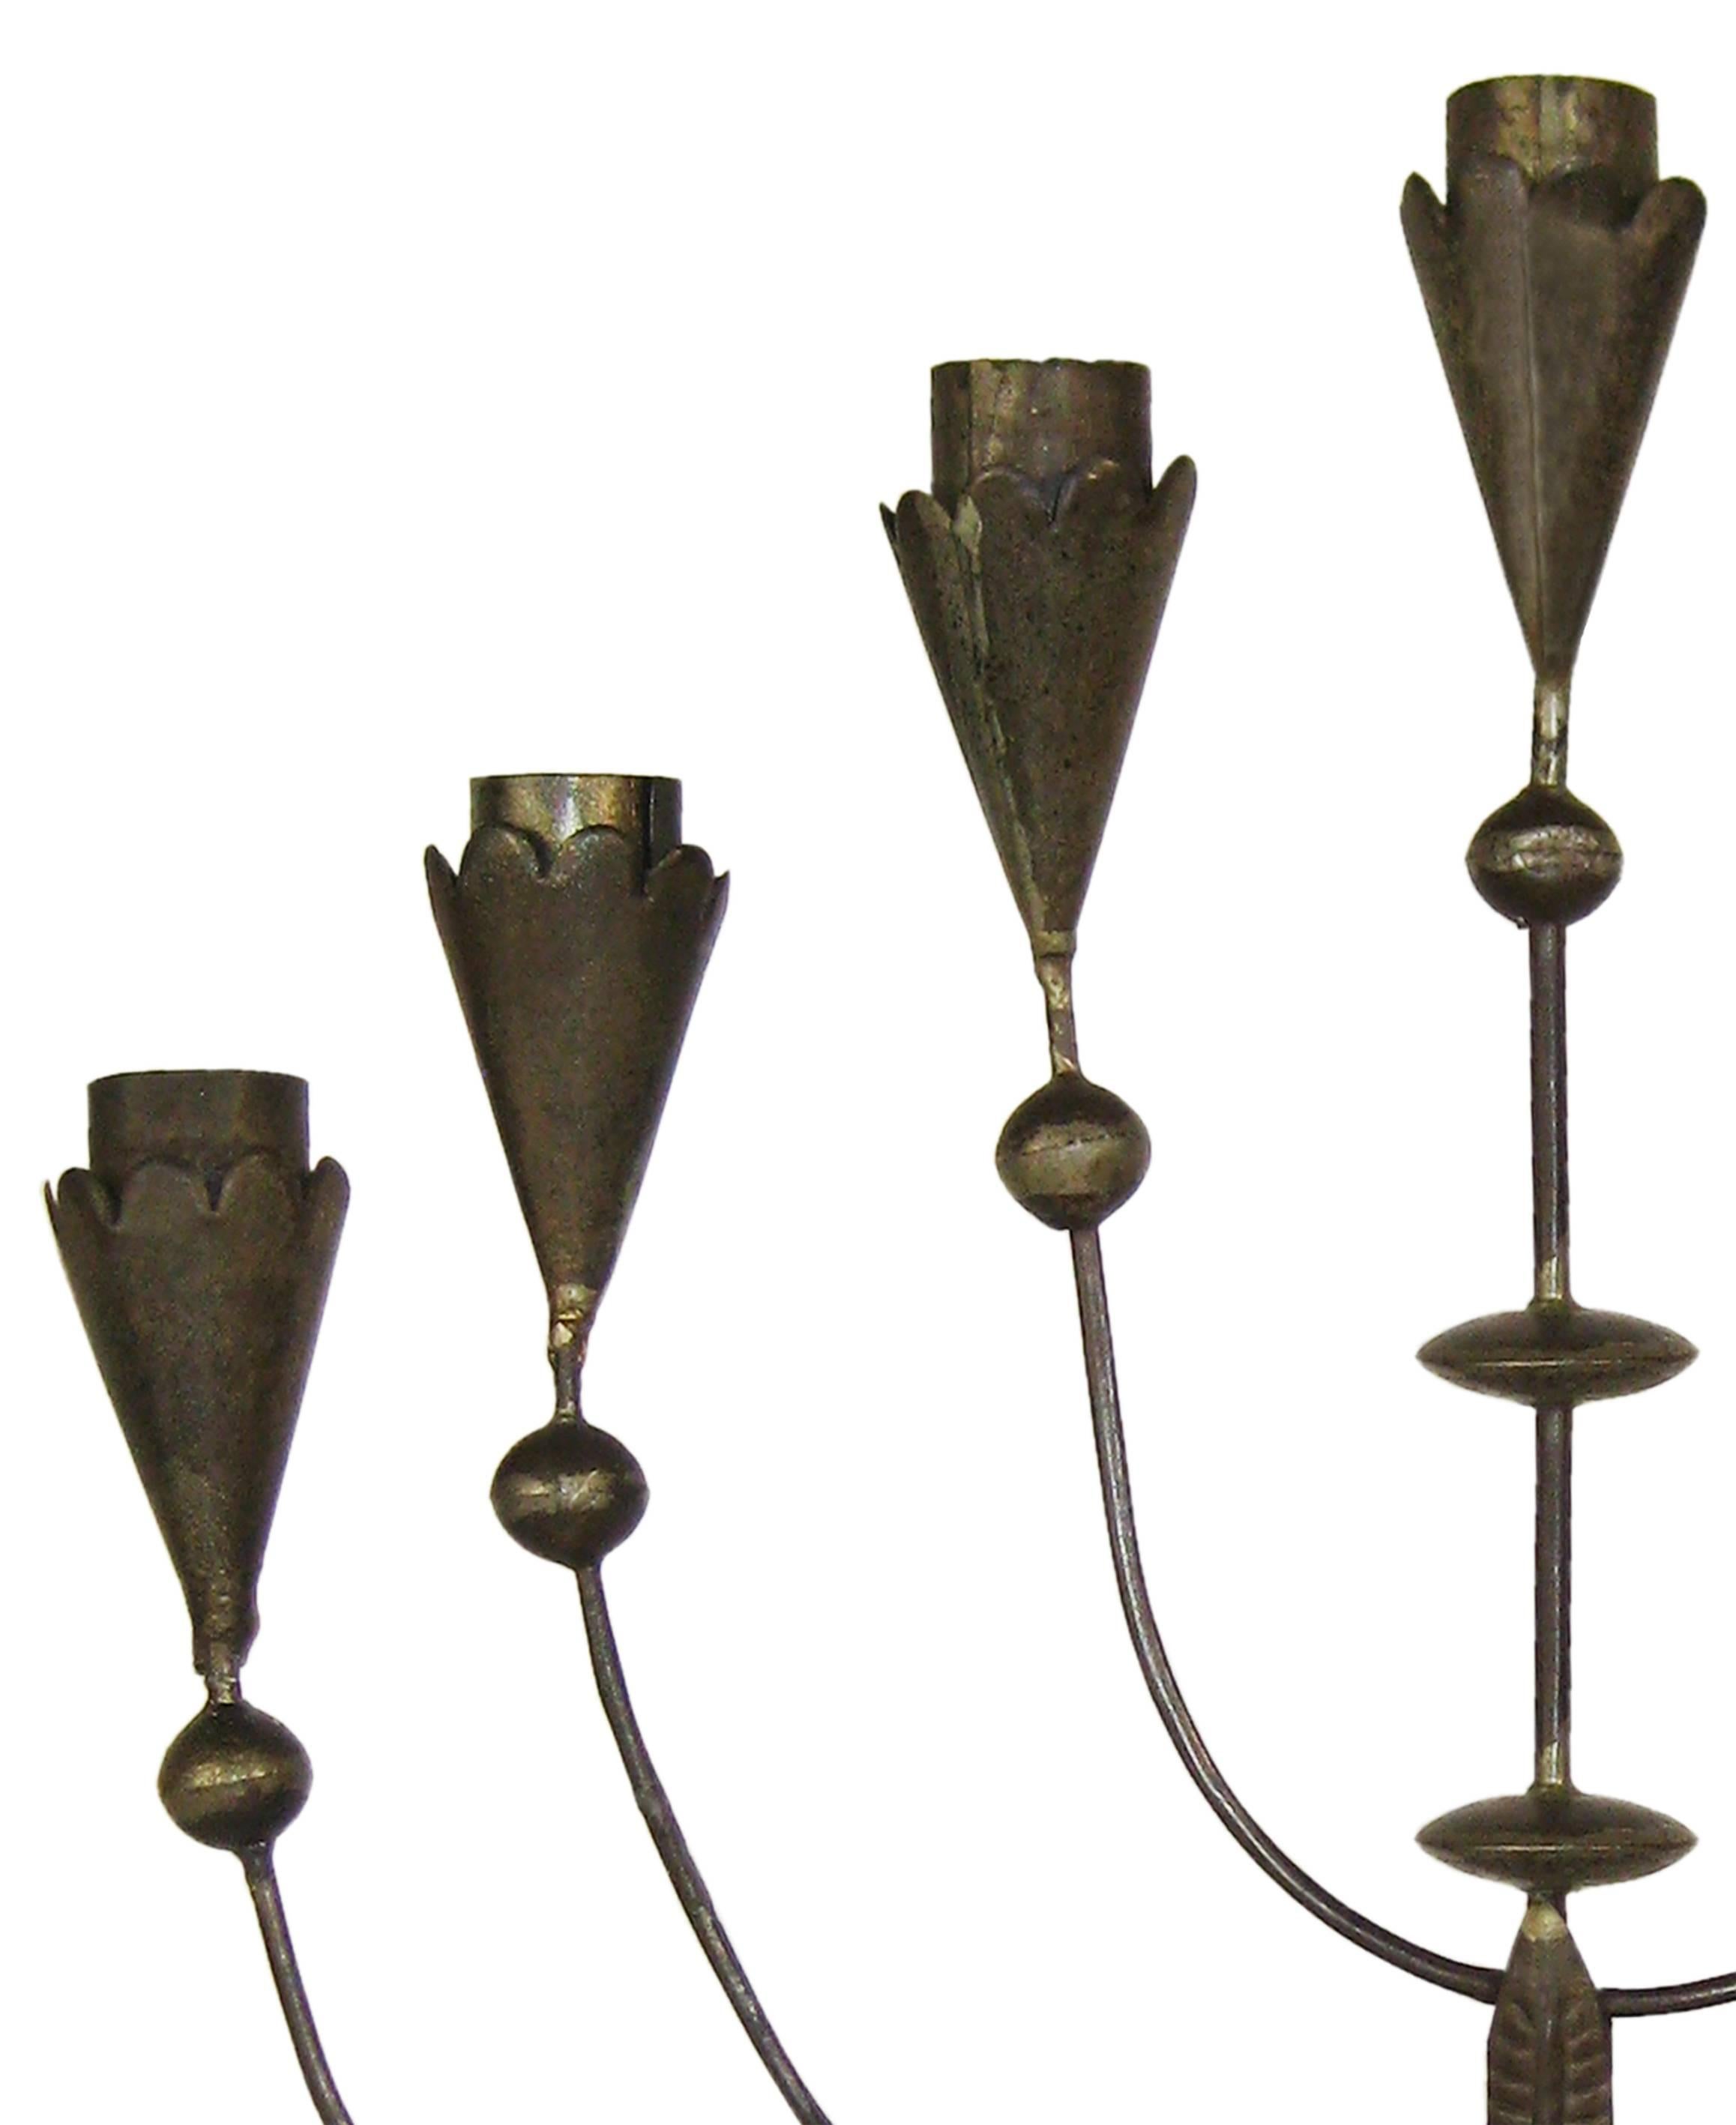 Candelabrum composed of seven arms with an octagonal base, found in various museum collections. A lovely piece dating back to Spratling's first design period, in the early Taxco years when he was still experimenting with a variety of